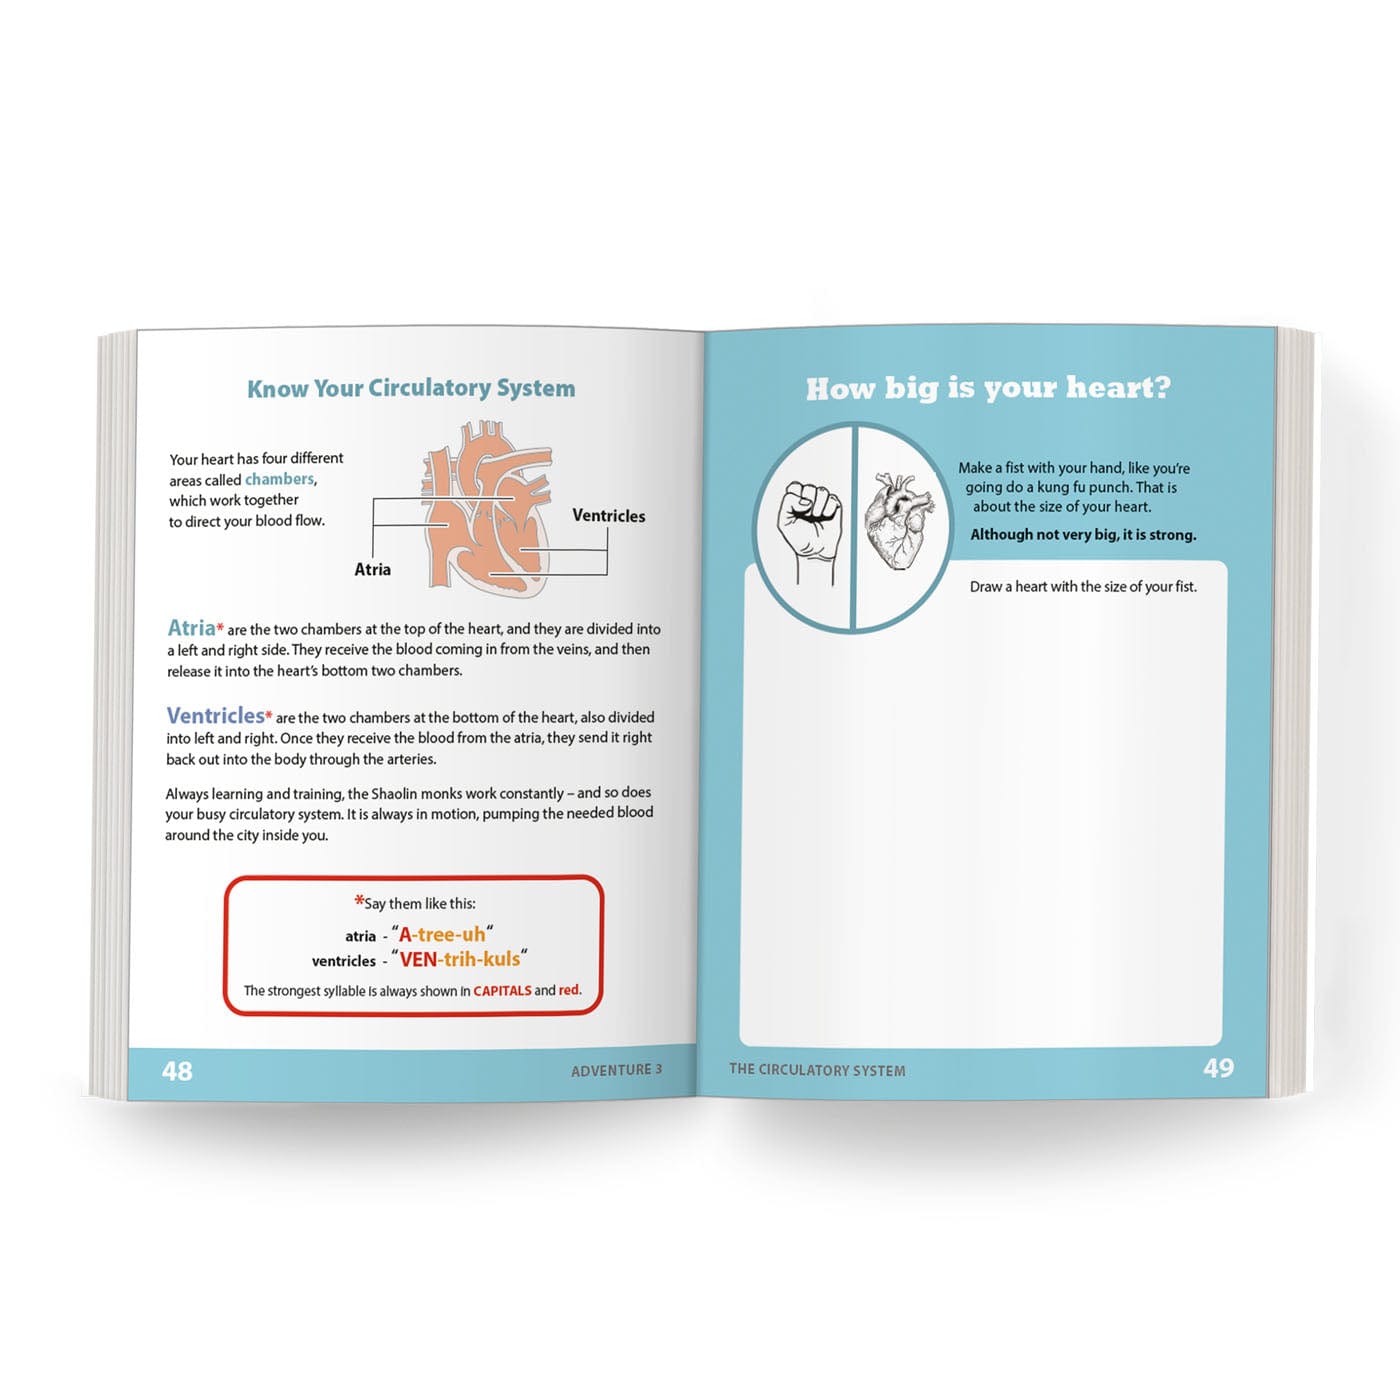 The Circulatory System: Adventure 3 Health Education for Children